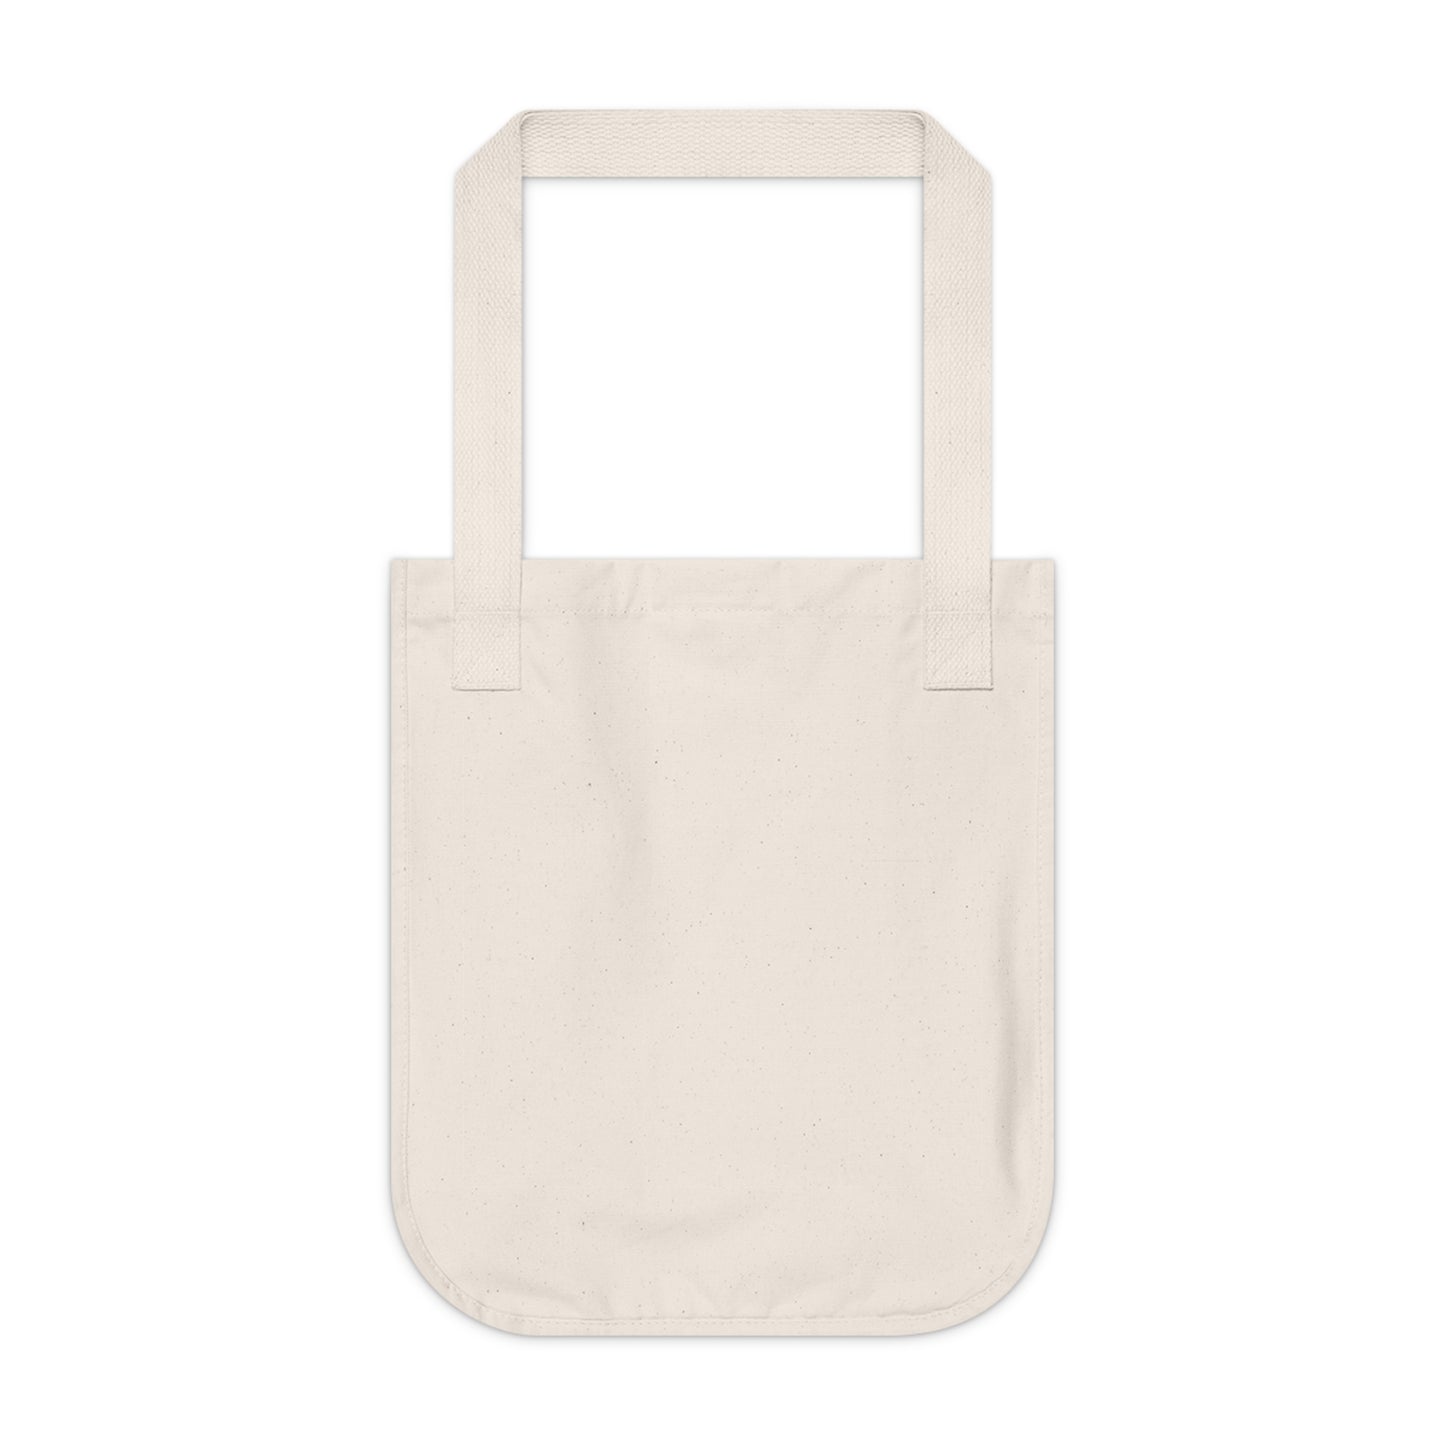 "Nature's Palette: Capturing the Splendor of the Wild" - Bam Boo! Lifestyle Eco-friendly Tote Bag